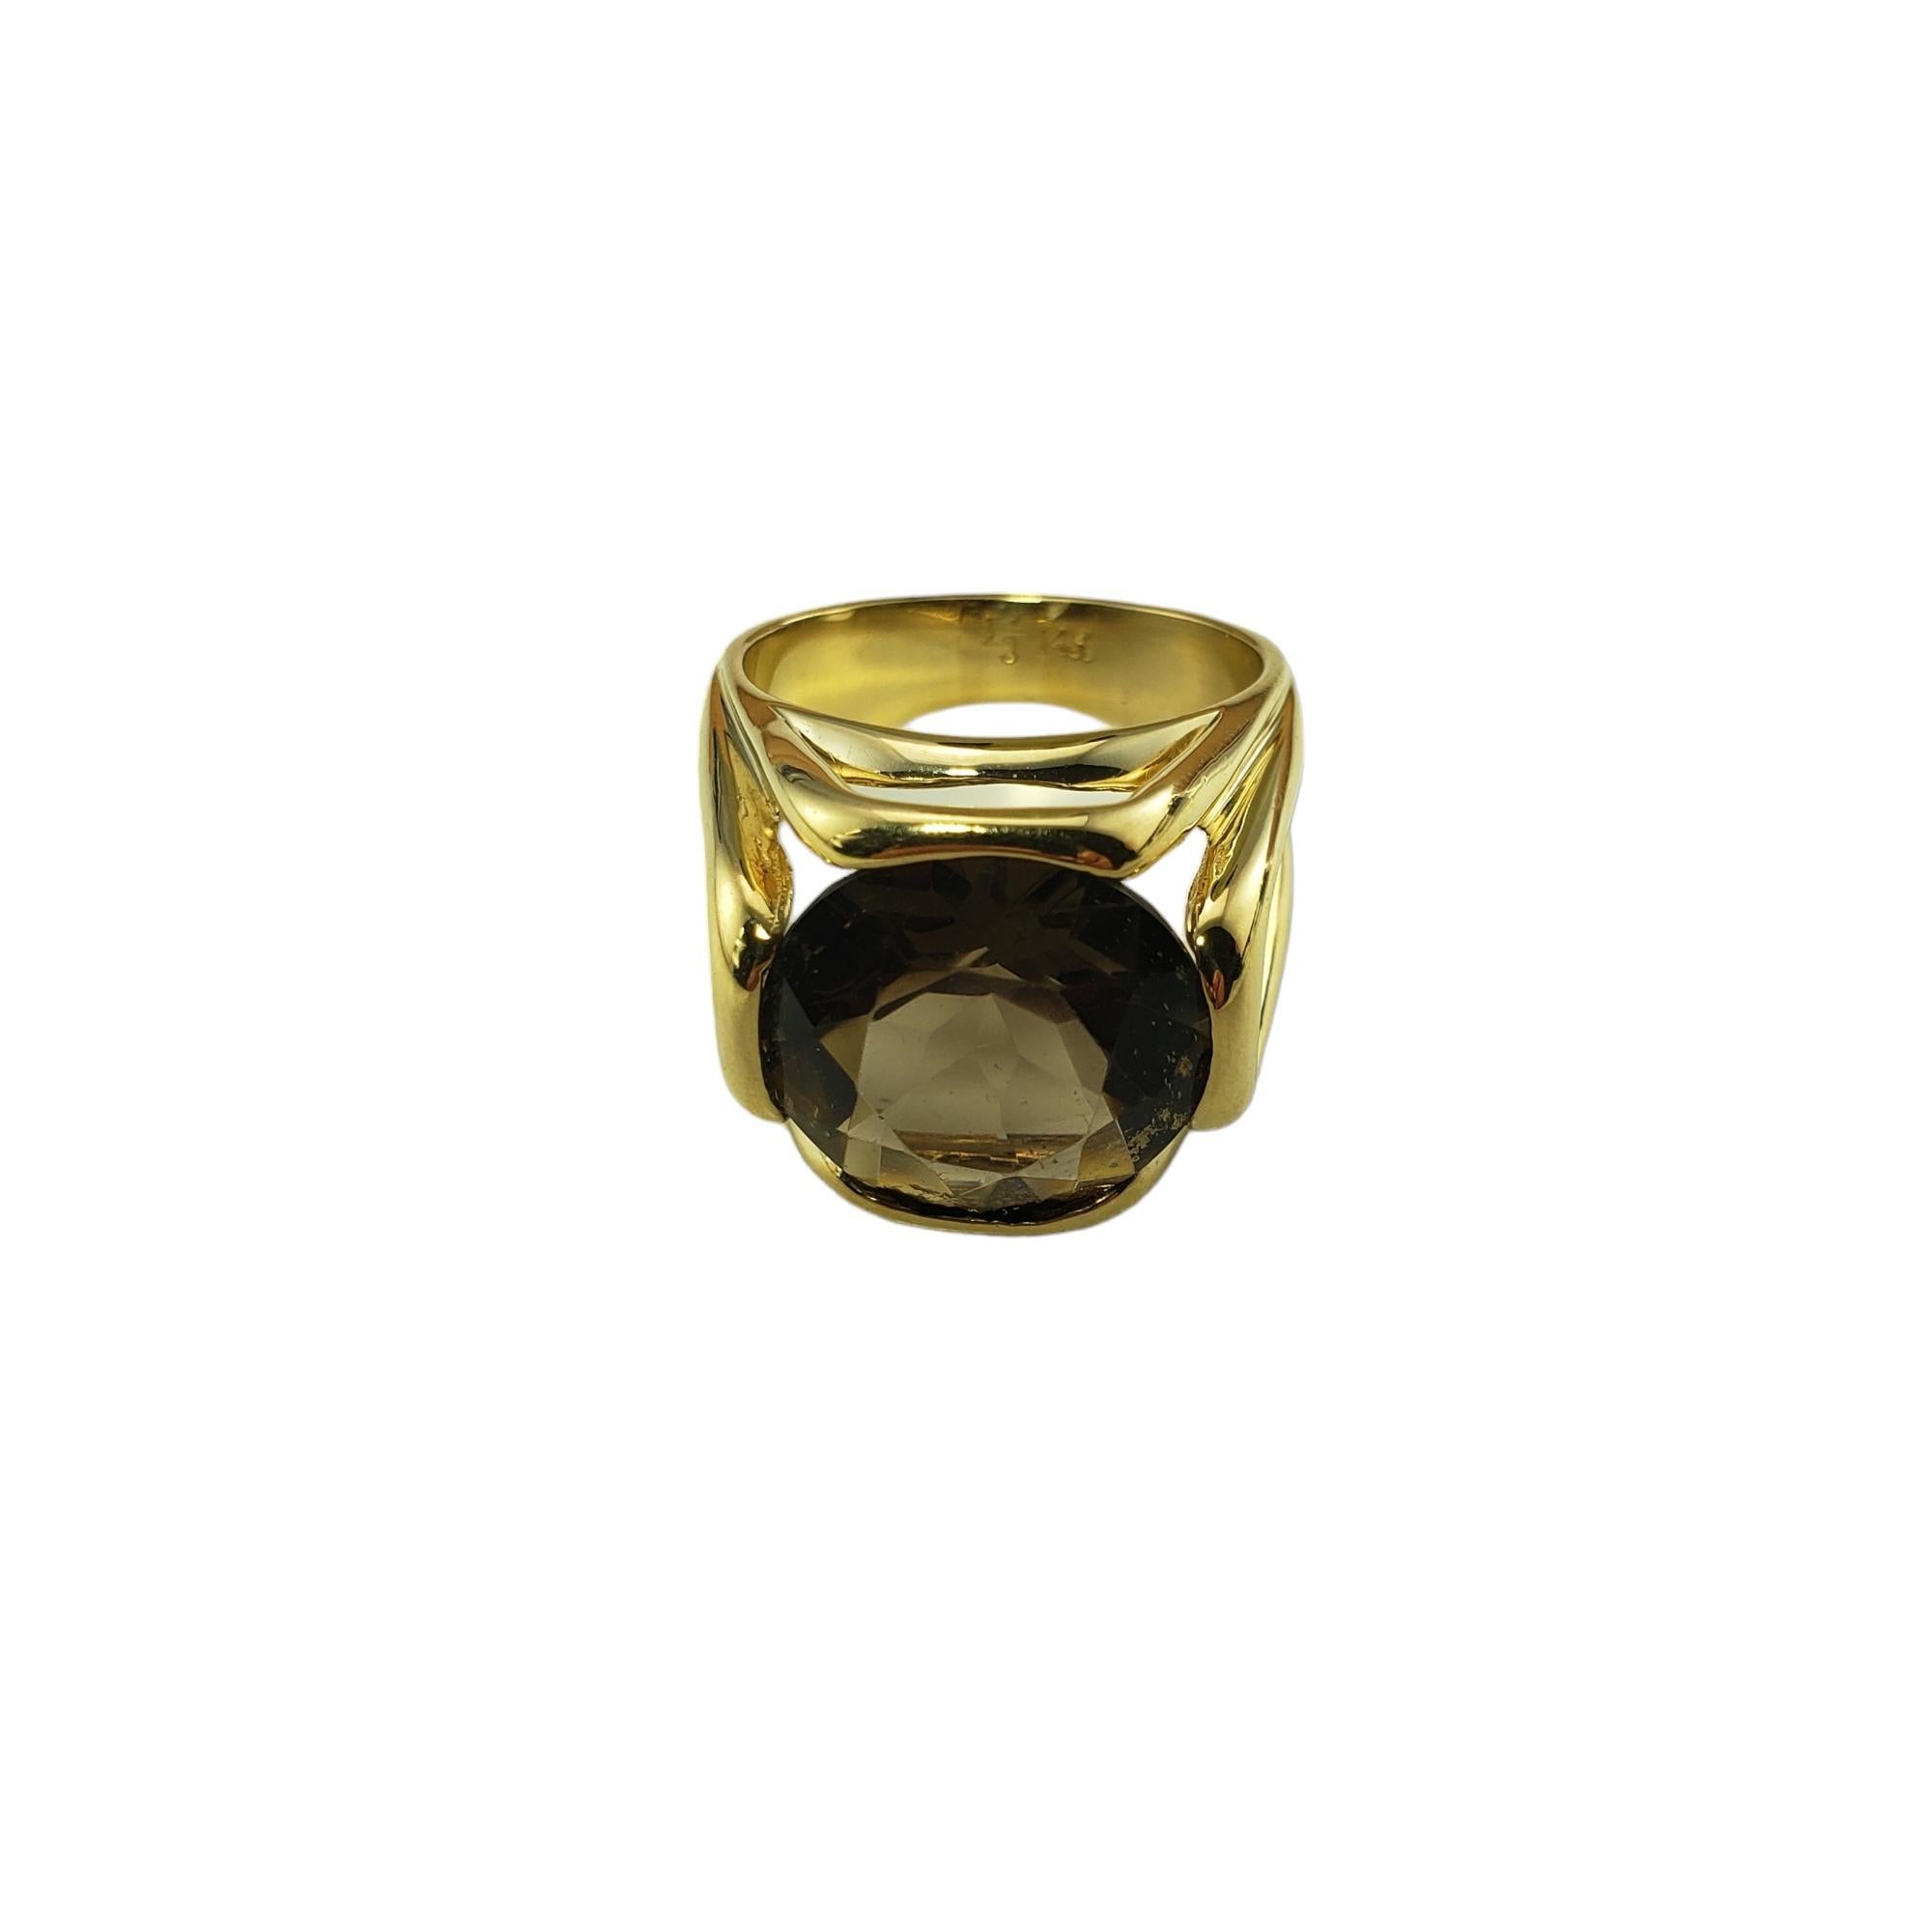 Vintage 14 Karat Yellow Gold Smiky Quartz Ring Size 8 JAGi Certified #15461-

This elegant ring features one round smoky quartz stone (14 mm) set in beautifully detailed 14K yellow gold.  Width:  16 mm.  Shank: 4.8 mm.

Quartz weight:  7.81